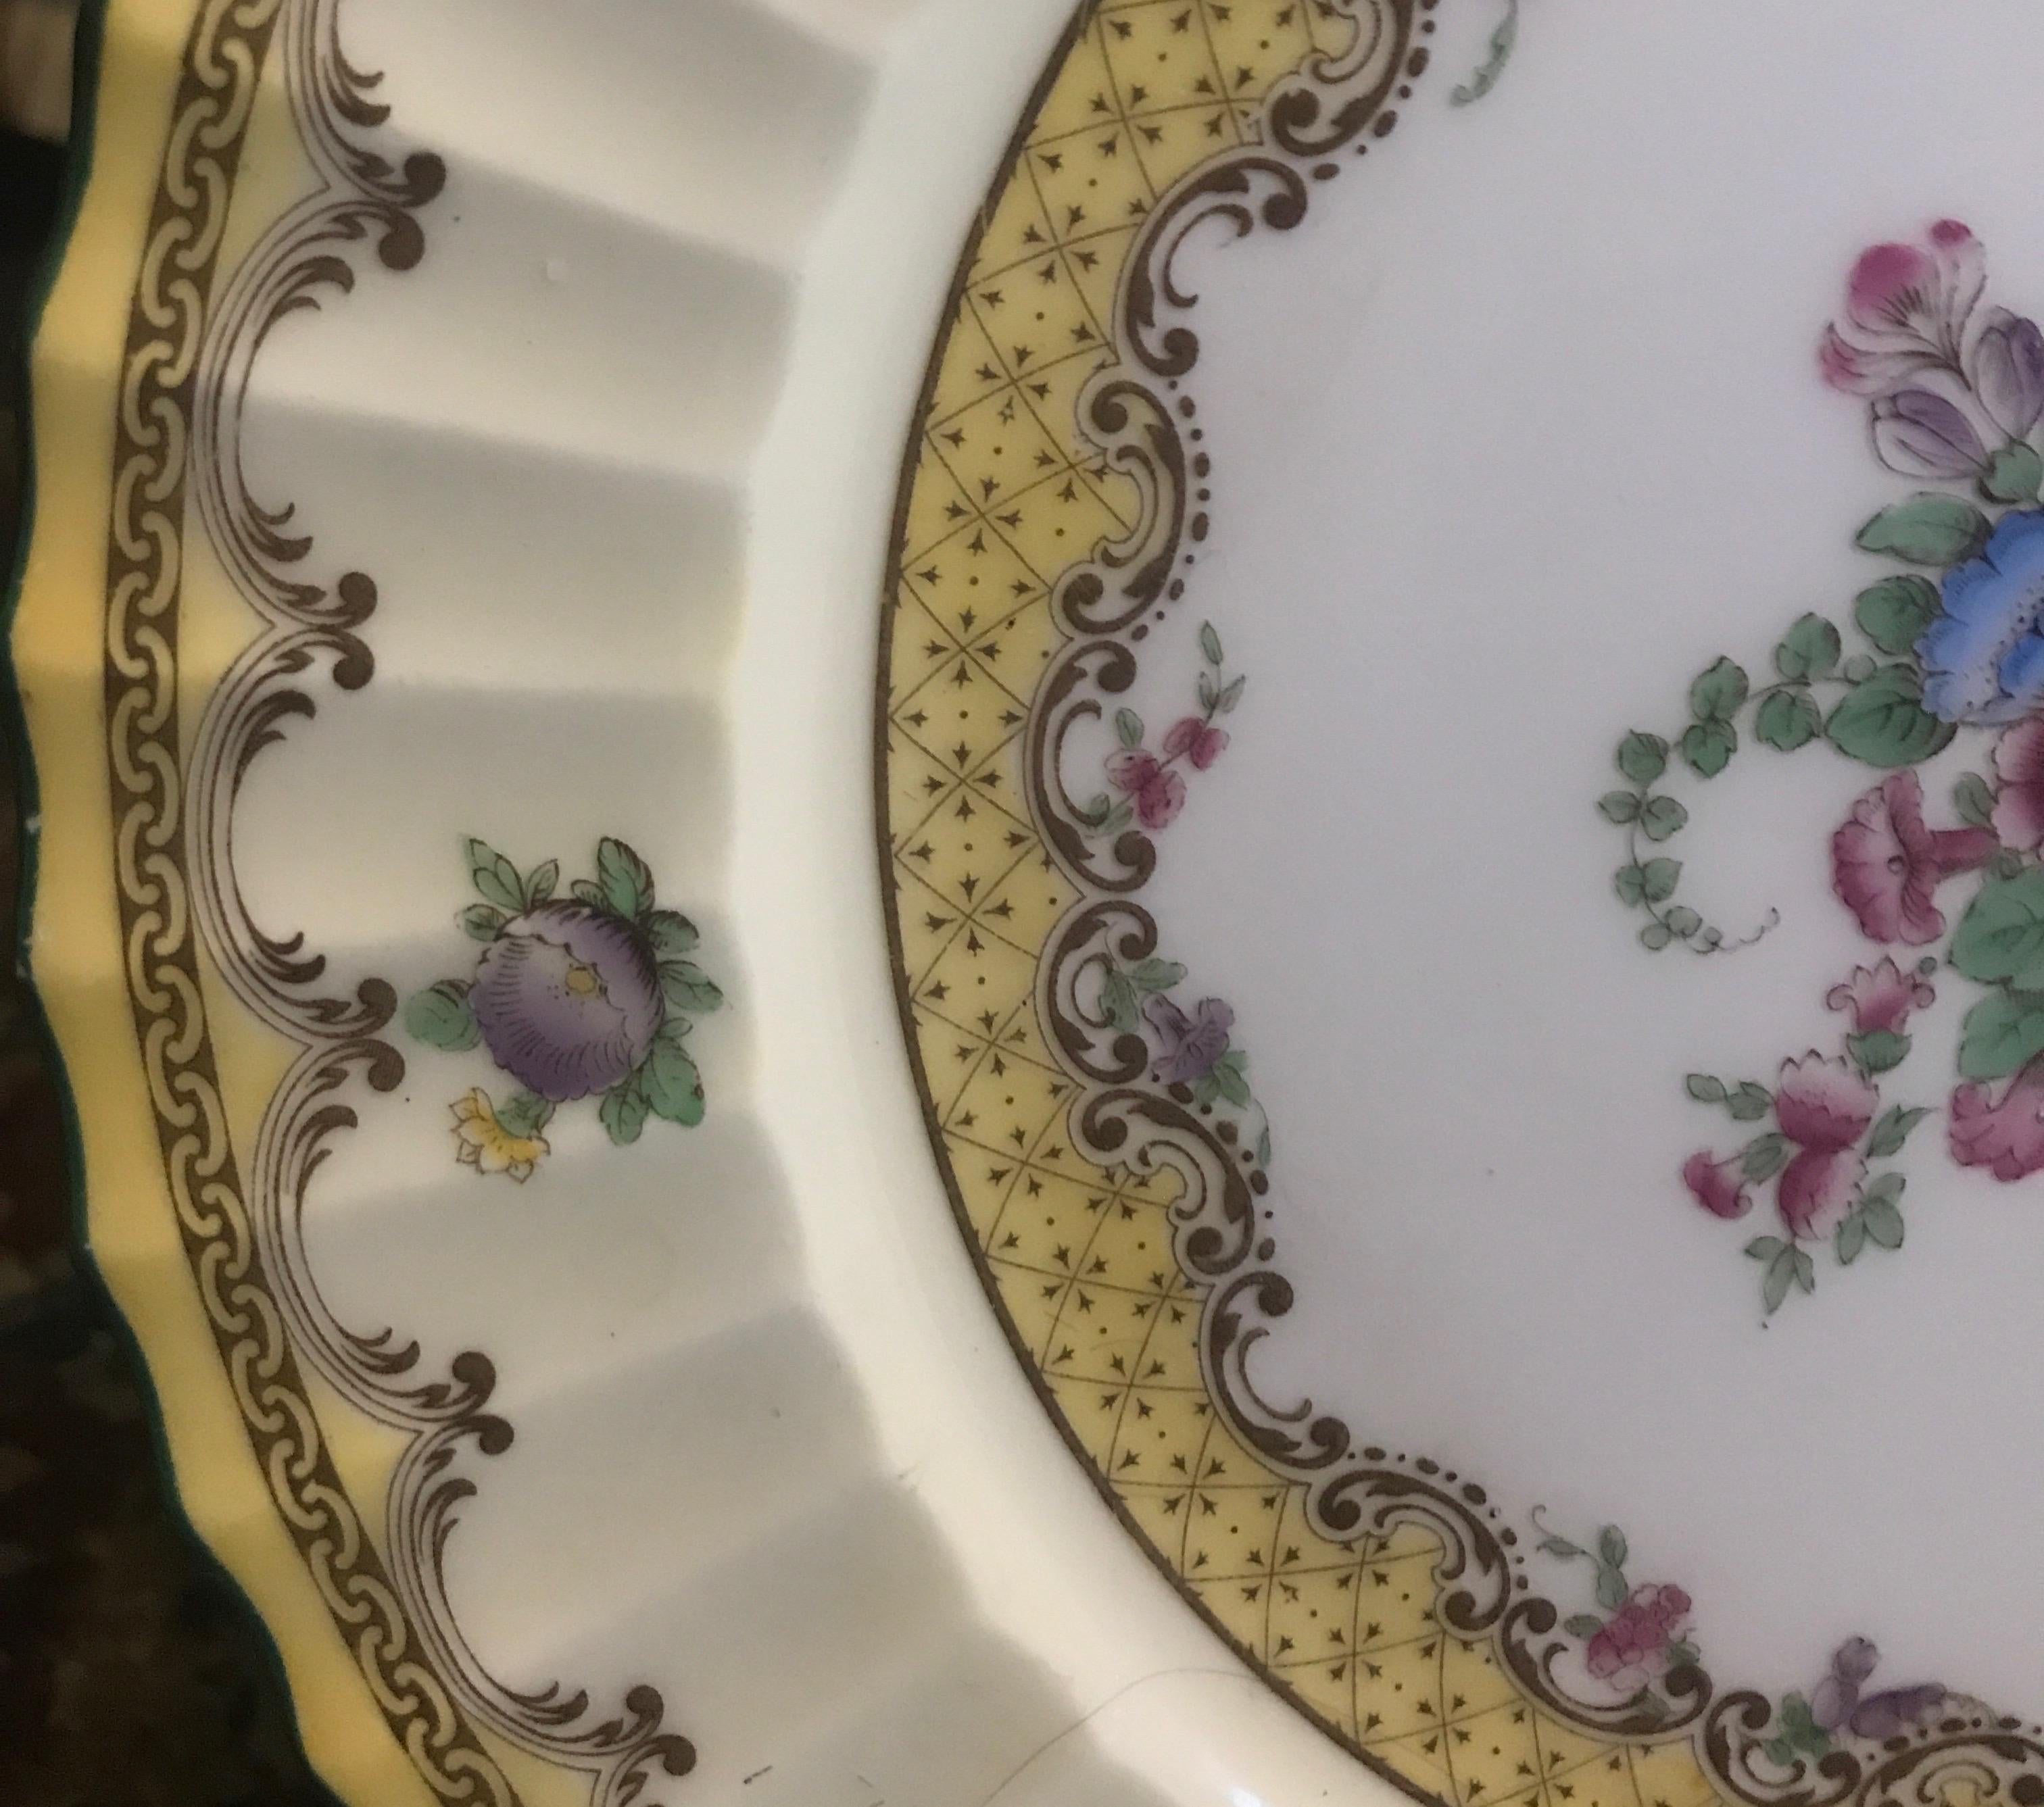 Set of 12 English Floral Service Dinner Plates by Royal Worcester In Excellent Condition For Sale In Lambertville, NJ